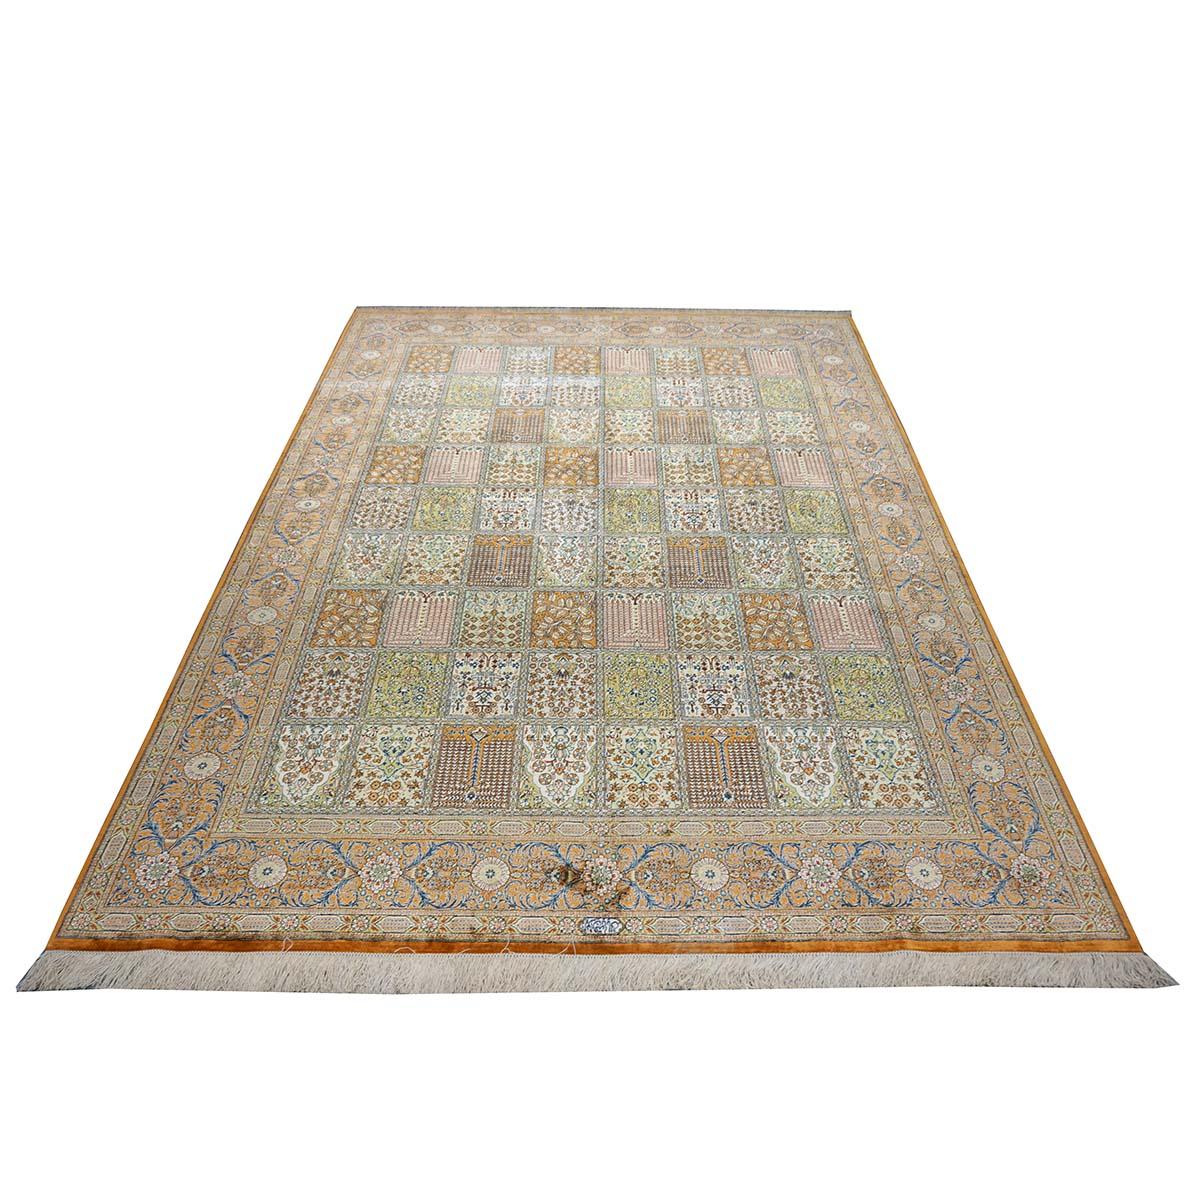 Ashly Fine Rugs presents a 1980s Vintage Persian Qum All-Silk. Qom (Qum) is a northern city in modern-day Iran that is known for its high-quality wool and silk rugs and is regarded as among the most expensive in the world. This piece is made